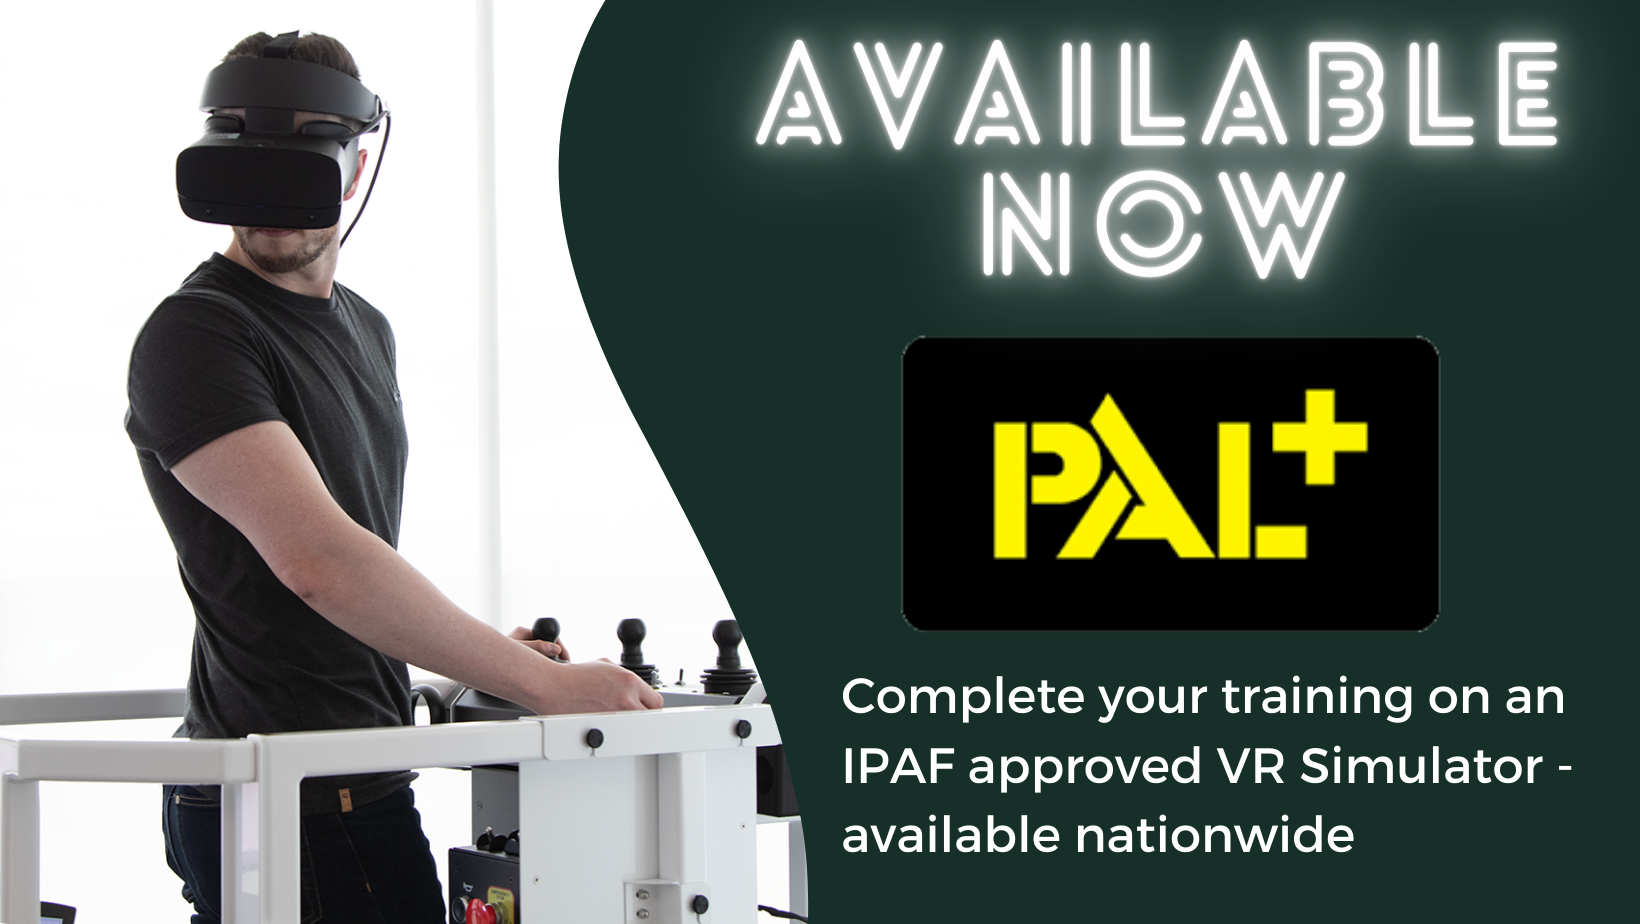 PAL+ Training now available at Quick Reach